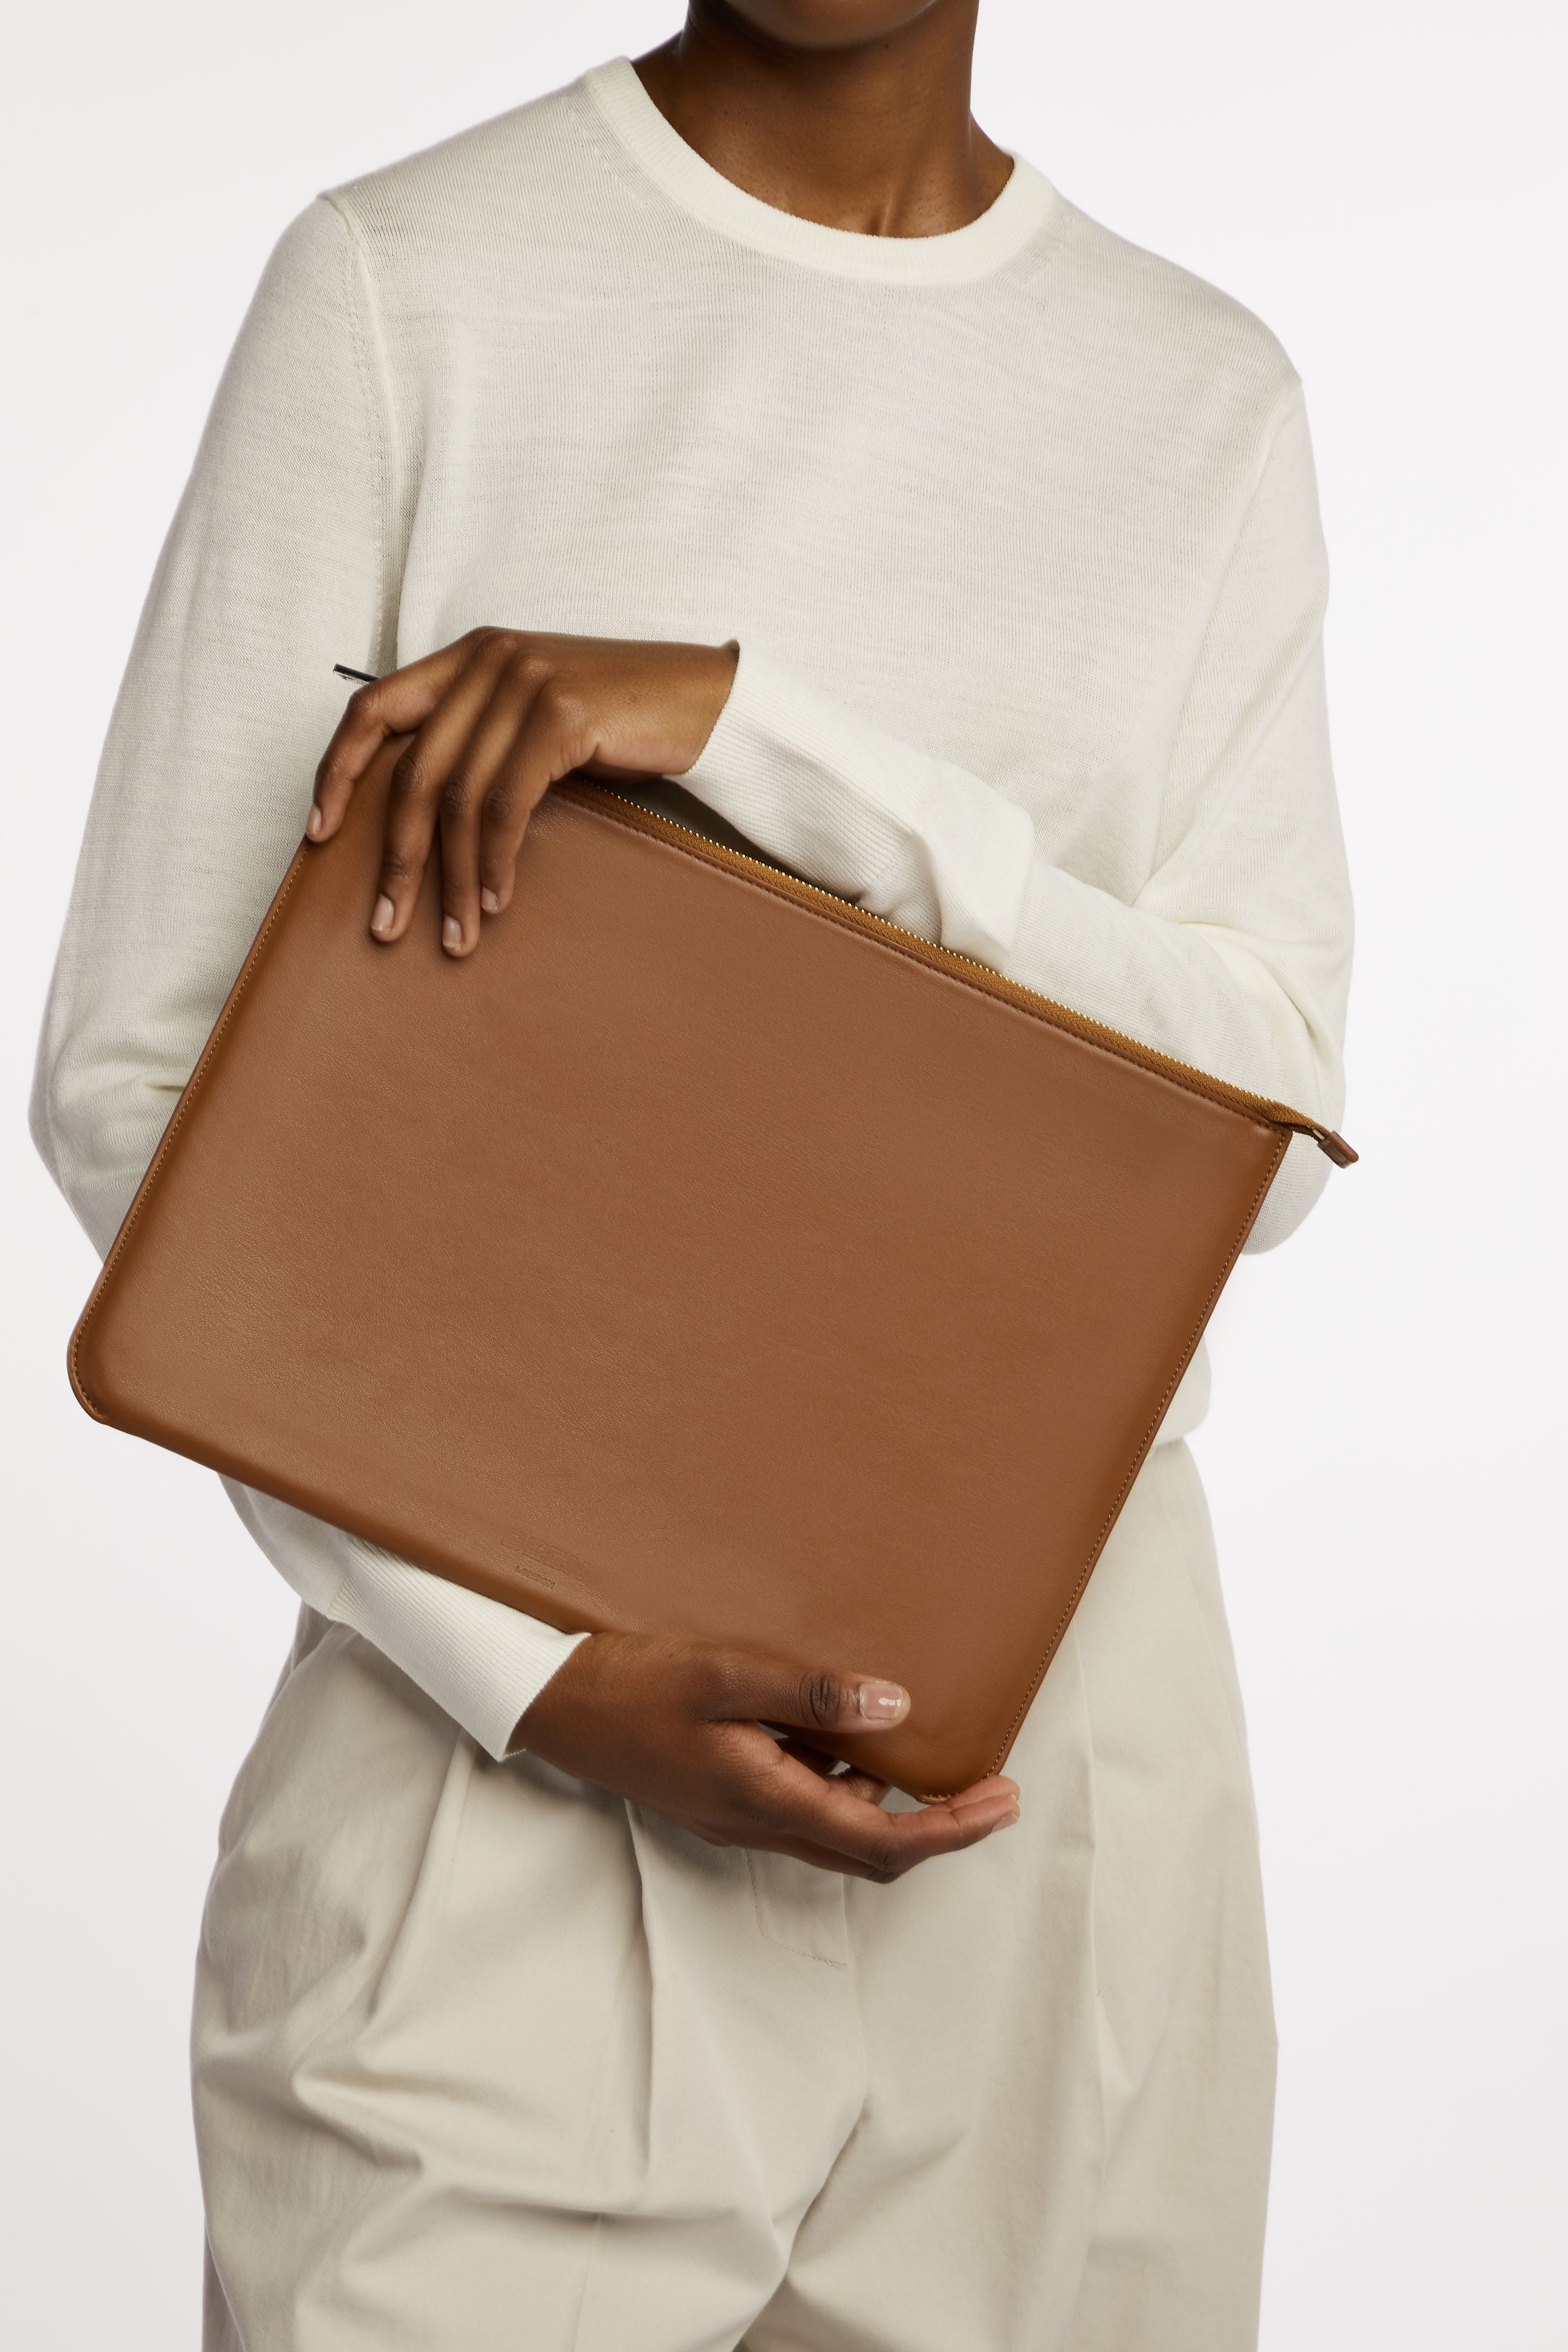 Martello Laptop Case- Large pouch in Acacia held by model